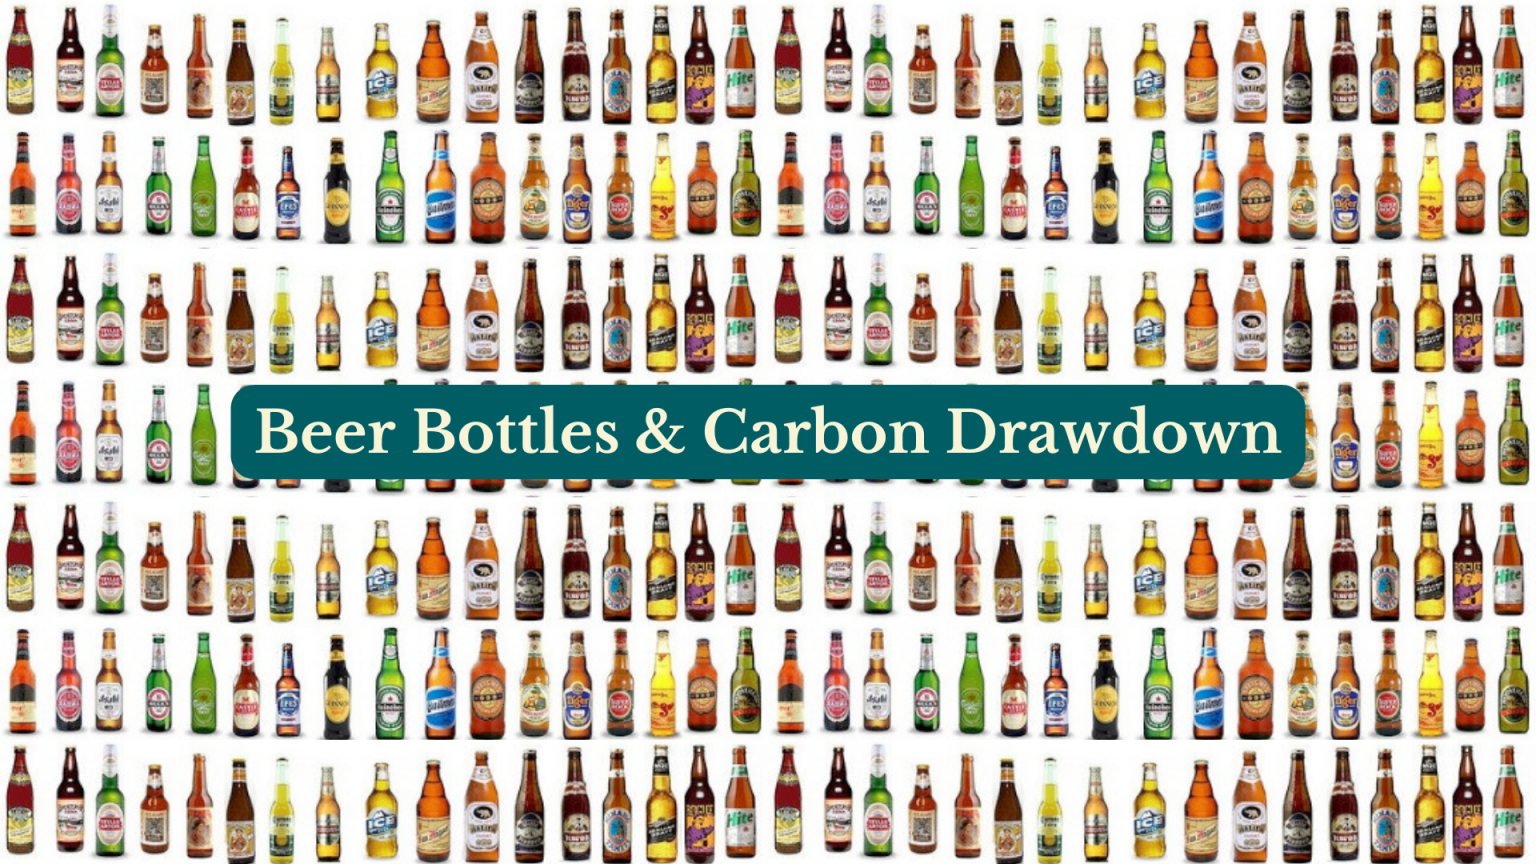 Beer bottles carbon drawdown effective climate action campaign